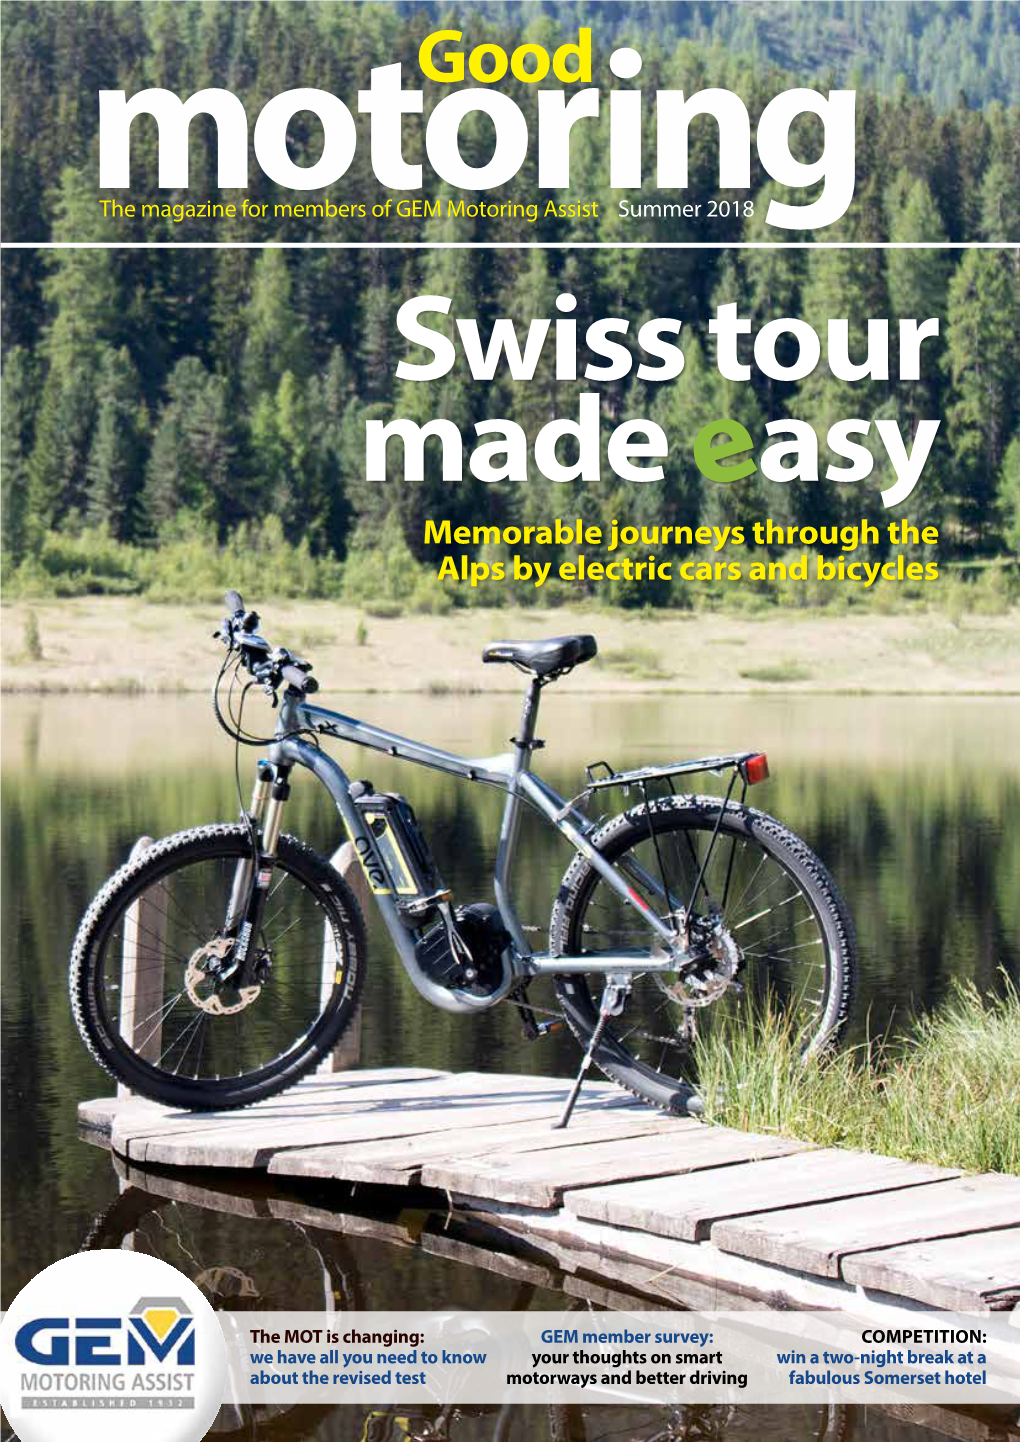 Memorable Journeys Through the Alps by Electric Cars and Bicycles